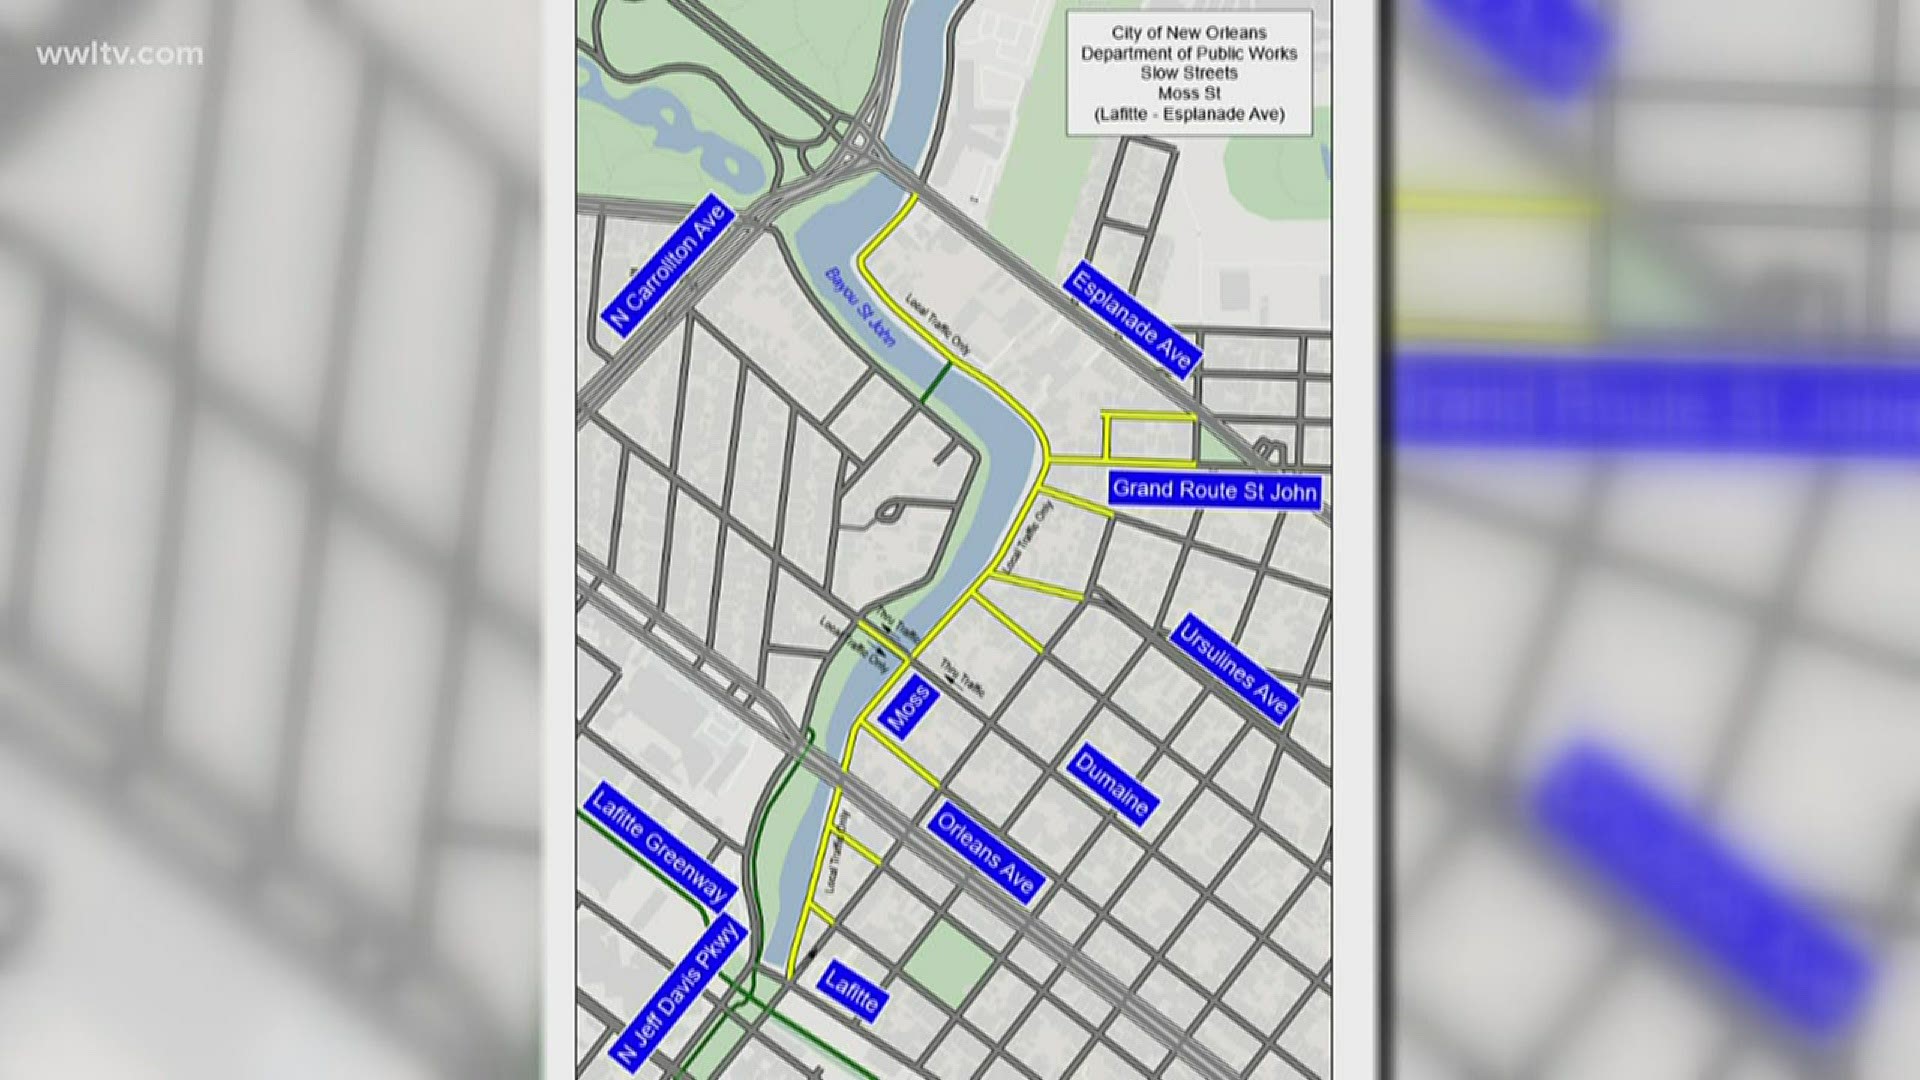 The traffic modifications will be put in place to limit access to the downtown side of Moss Street between Lafitte Avenue and Esplanade Avenue along Bayou St. John.